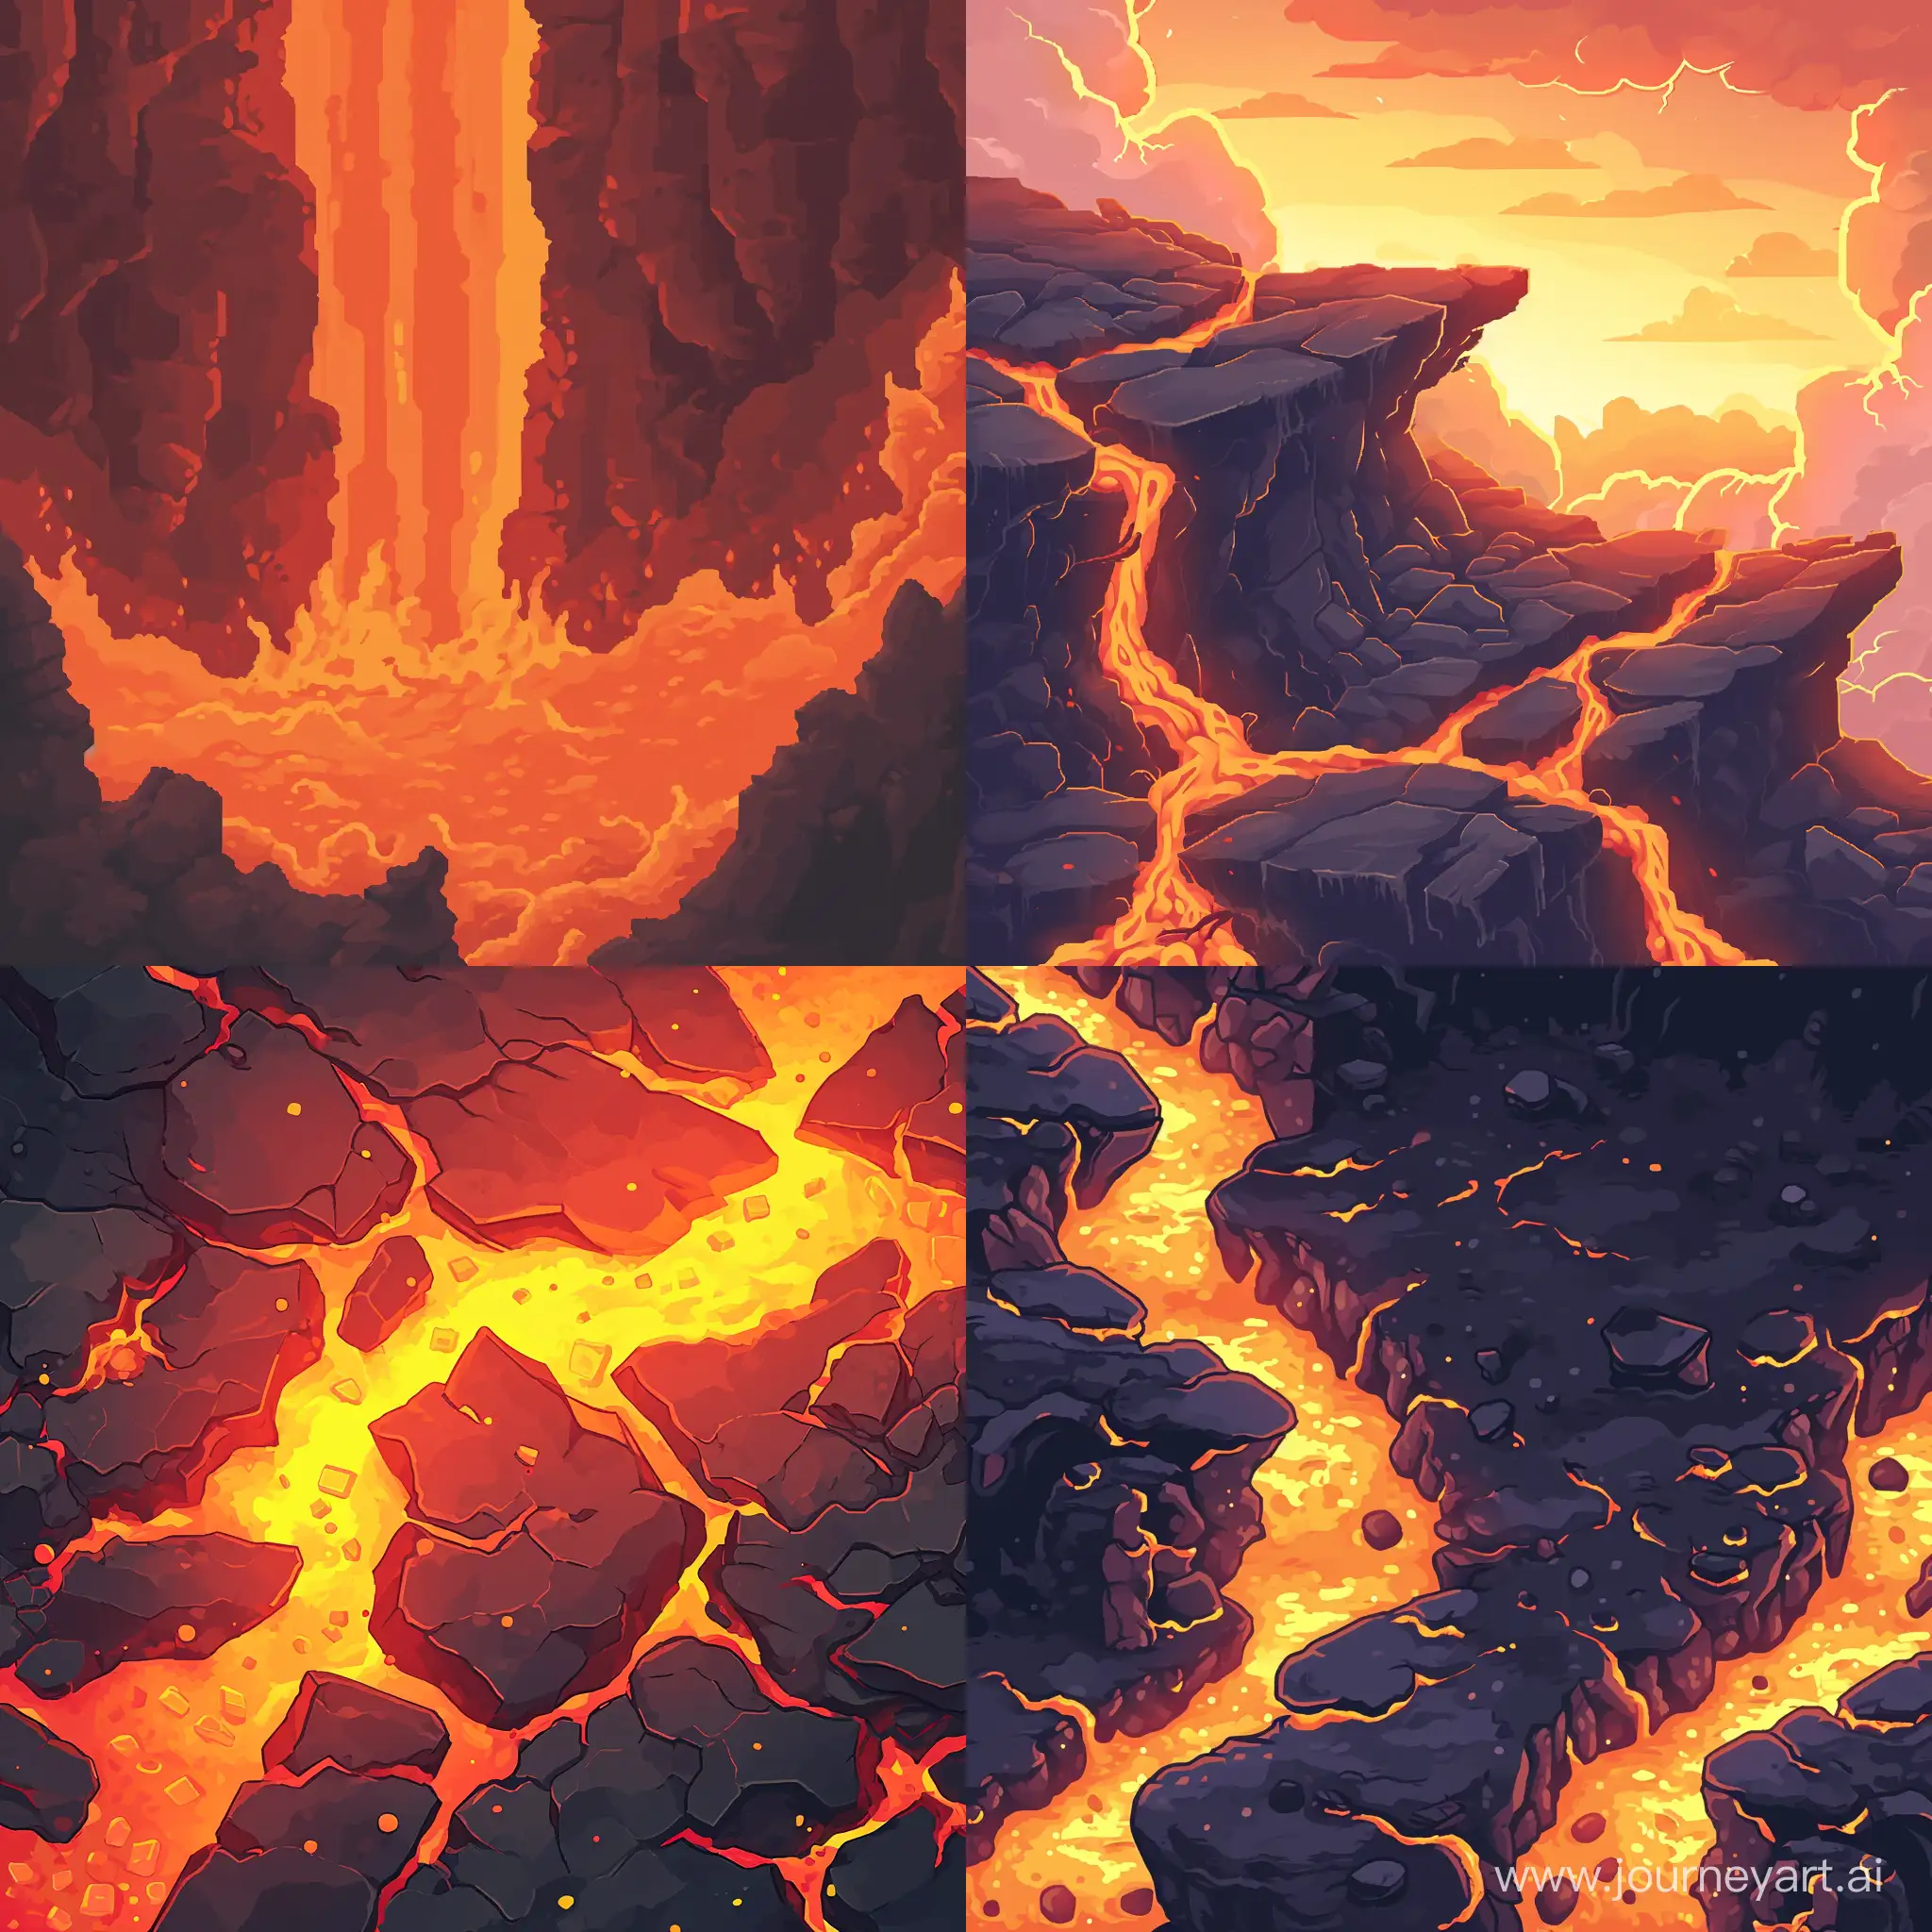 Create a lava background in pixel style